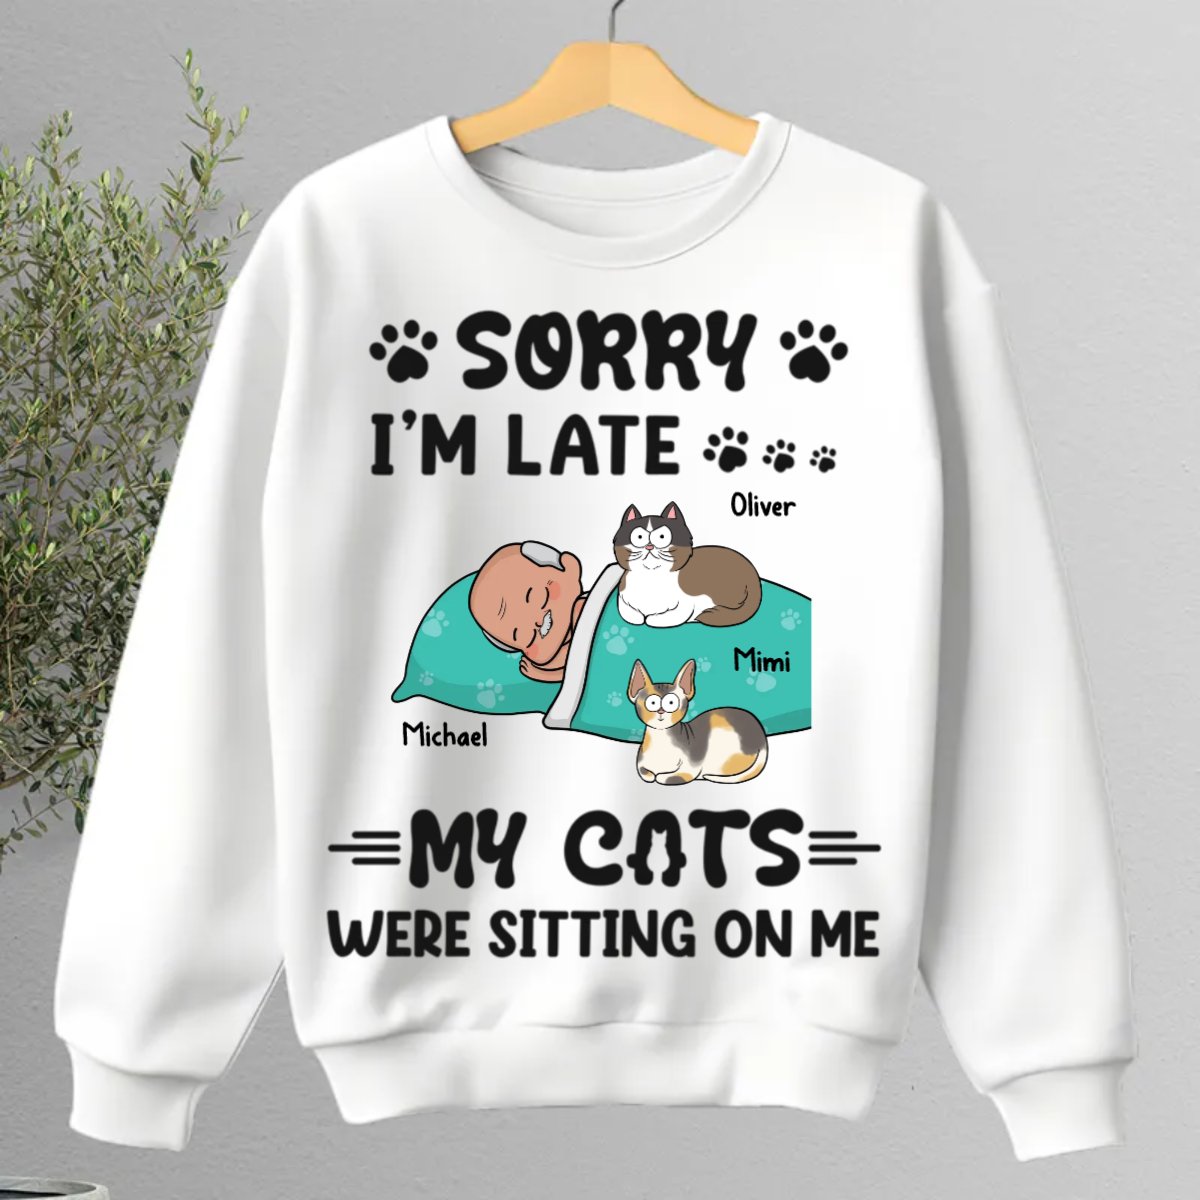 Cat Lovers - Sorry, I'm Late, My Cats Were Sitting On Me - Personalized Unisex T - shirt, Hoodie, Sweatshirt - The Next Custom Gift